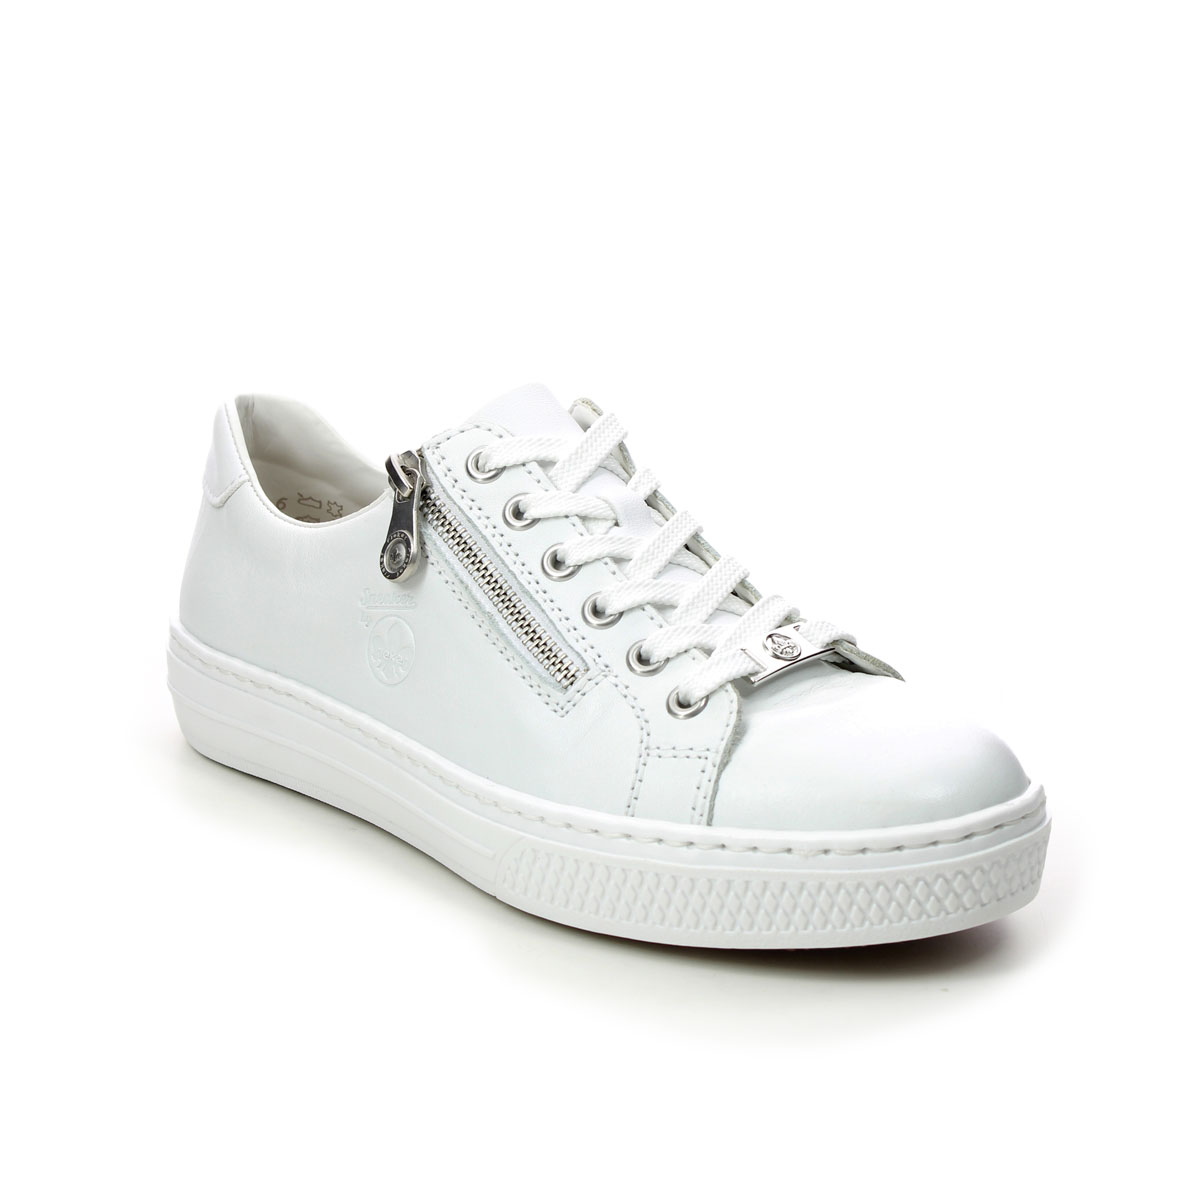 Rieker L59L1-83 WHITE LEATHER Womens trainers in a Plain Leather in Size 37